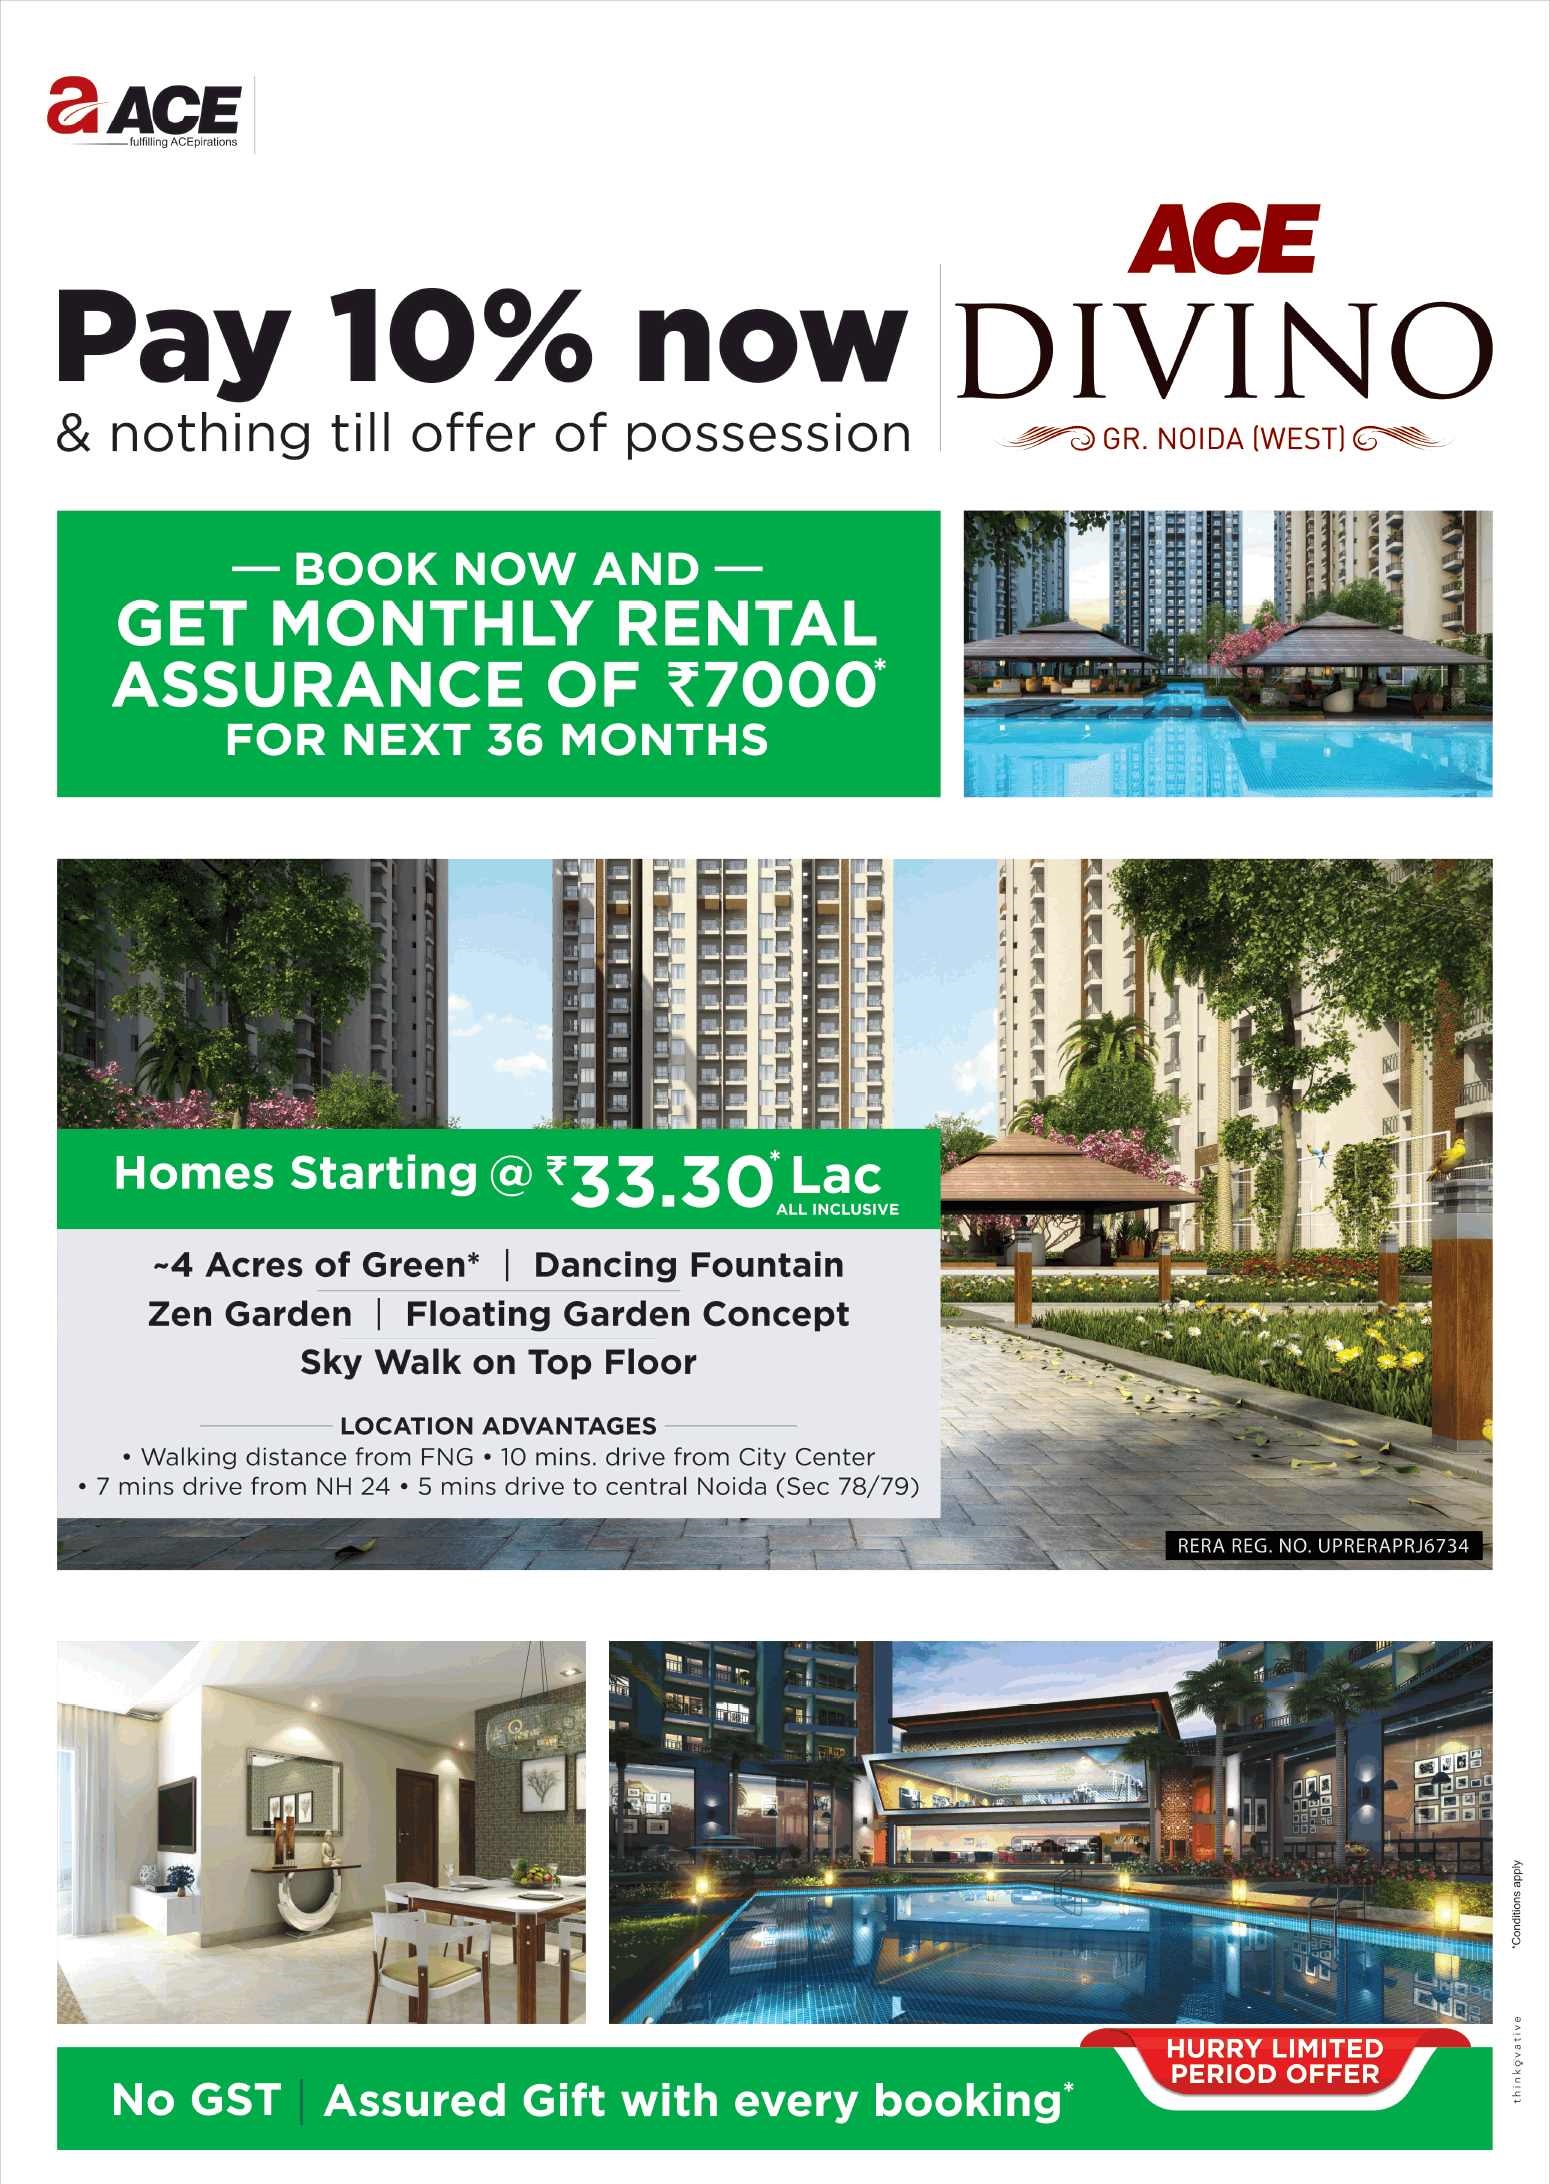 Pay 10% now & nothing till offer of possession at ACE Divino in Noida Update